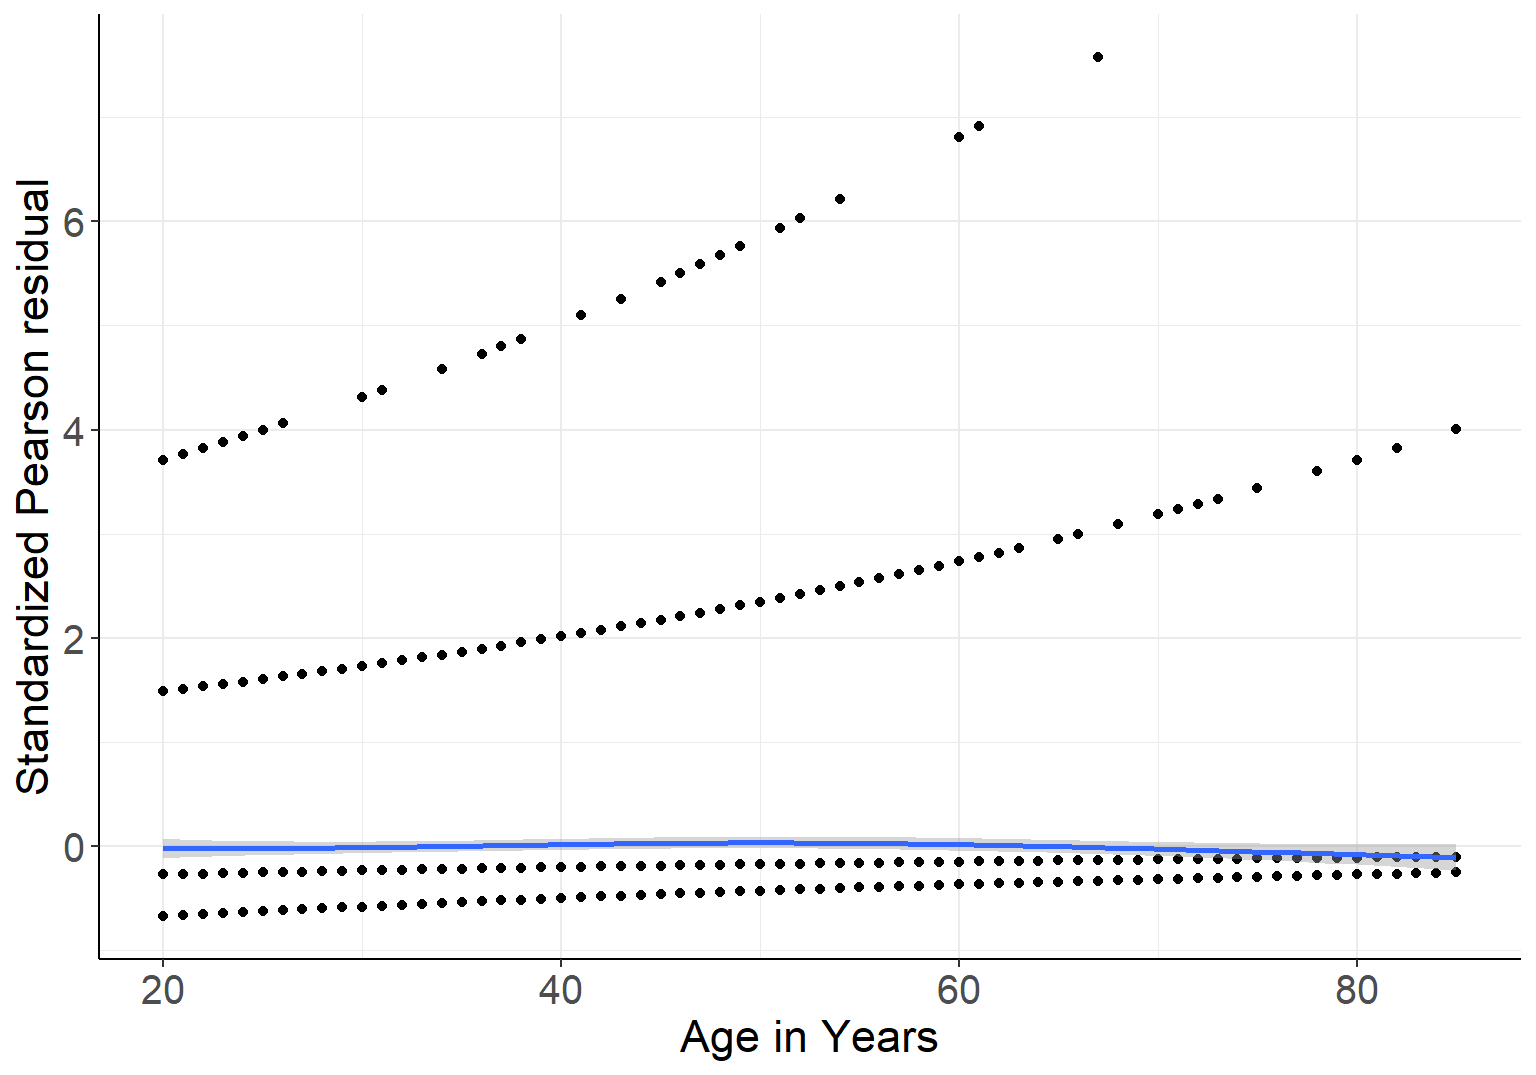 Standardized Pearson residuals agianst age, in logistic model with gender and linear age as covariates